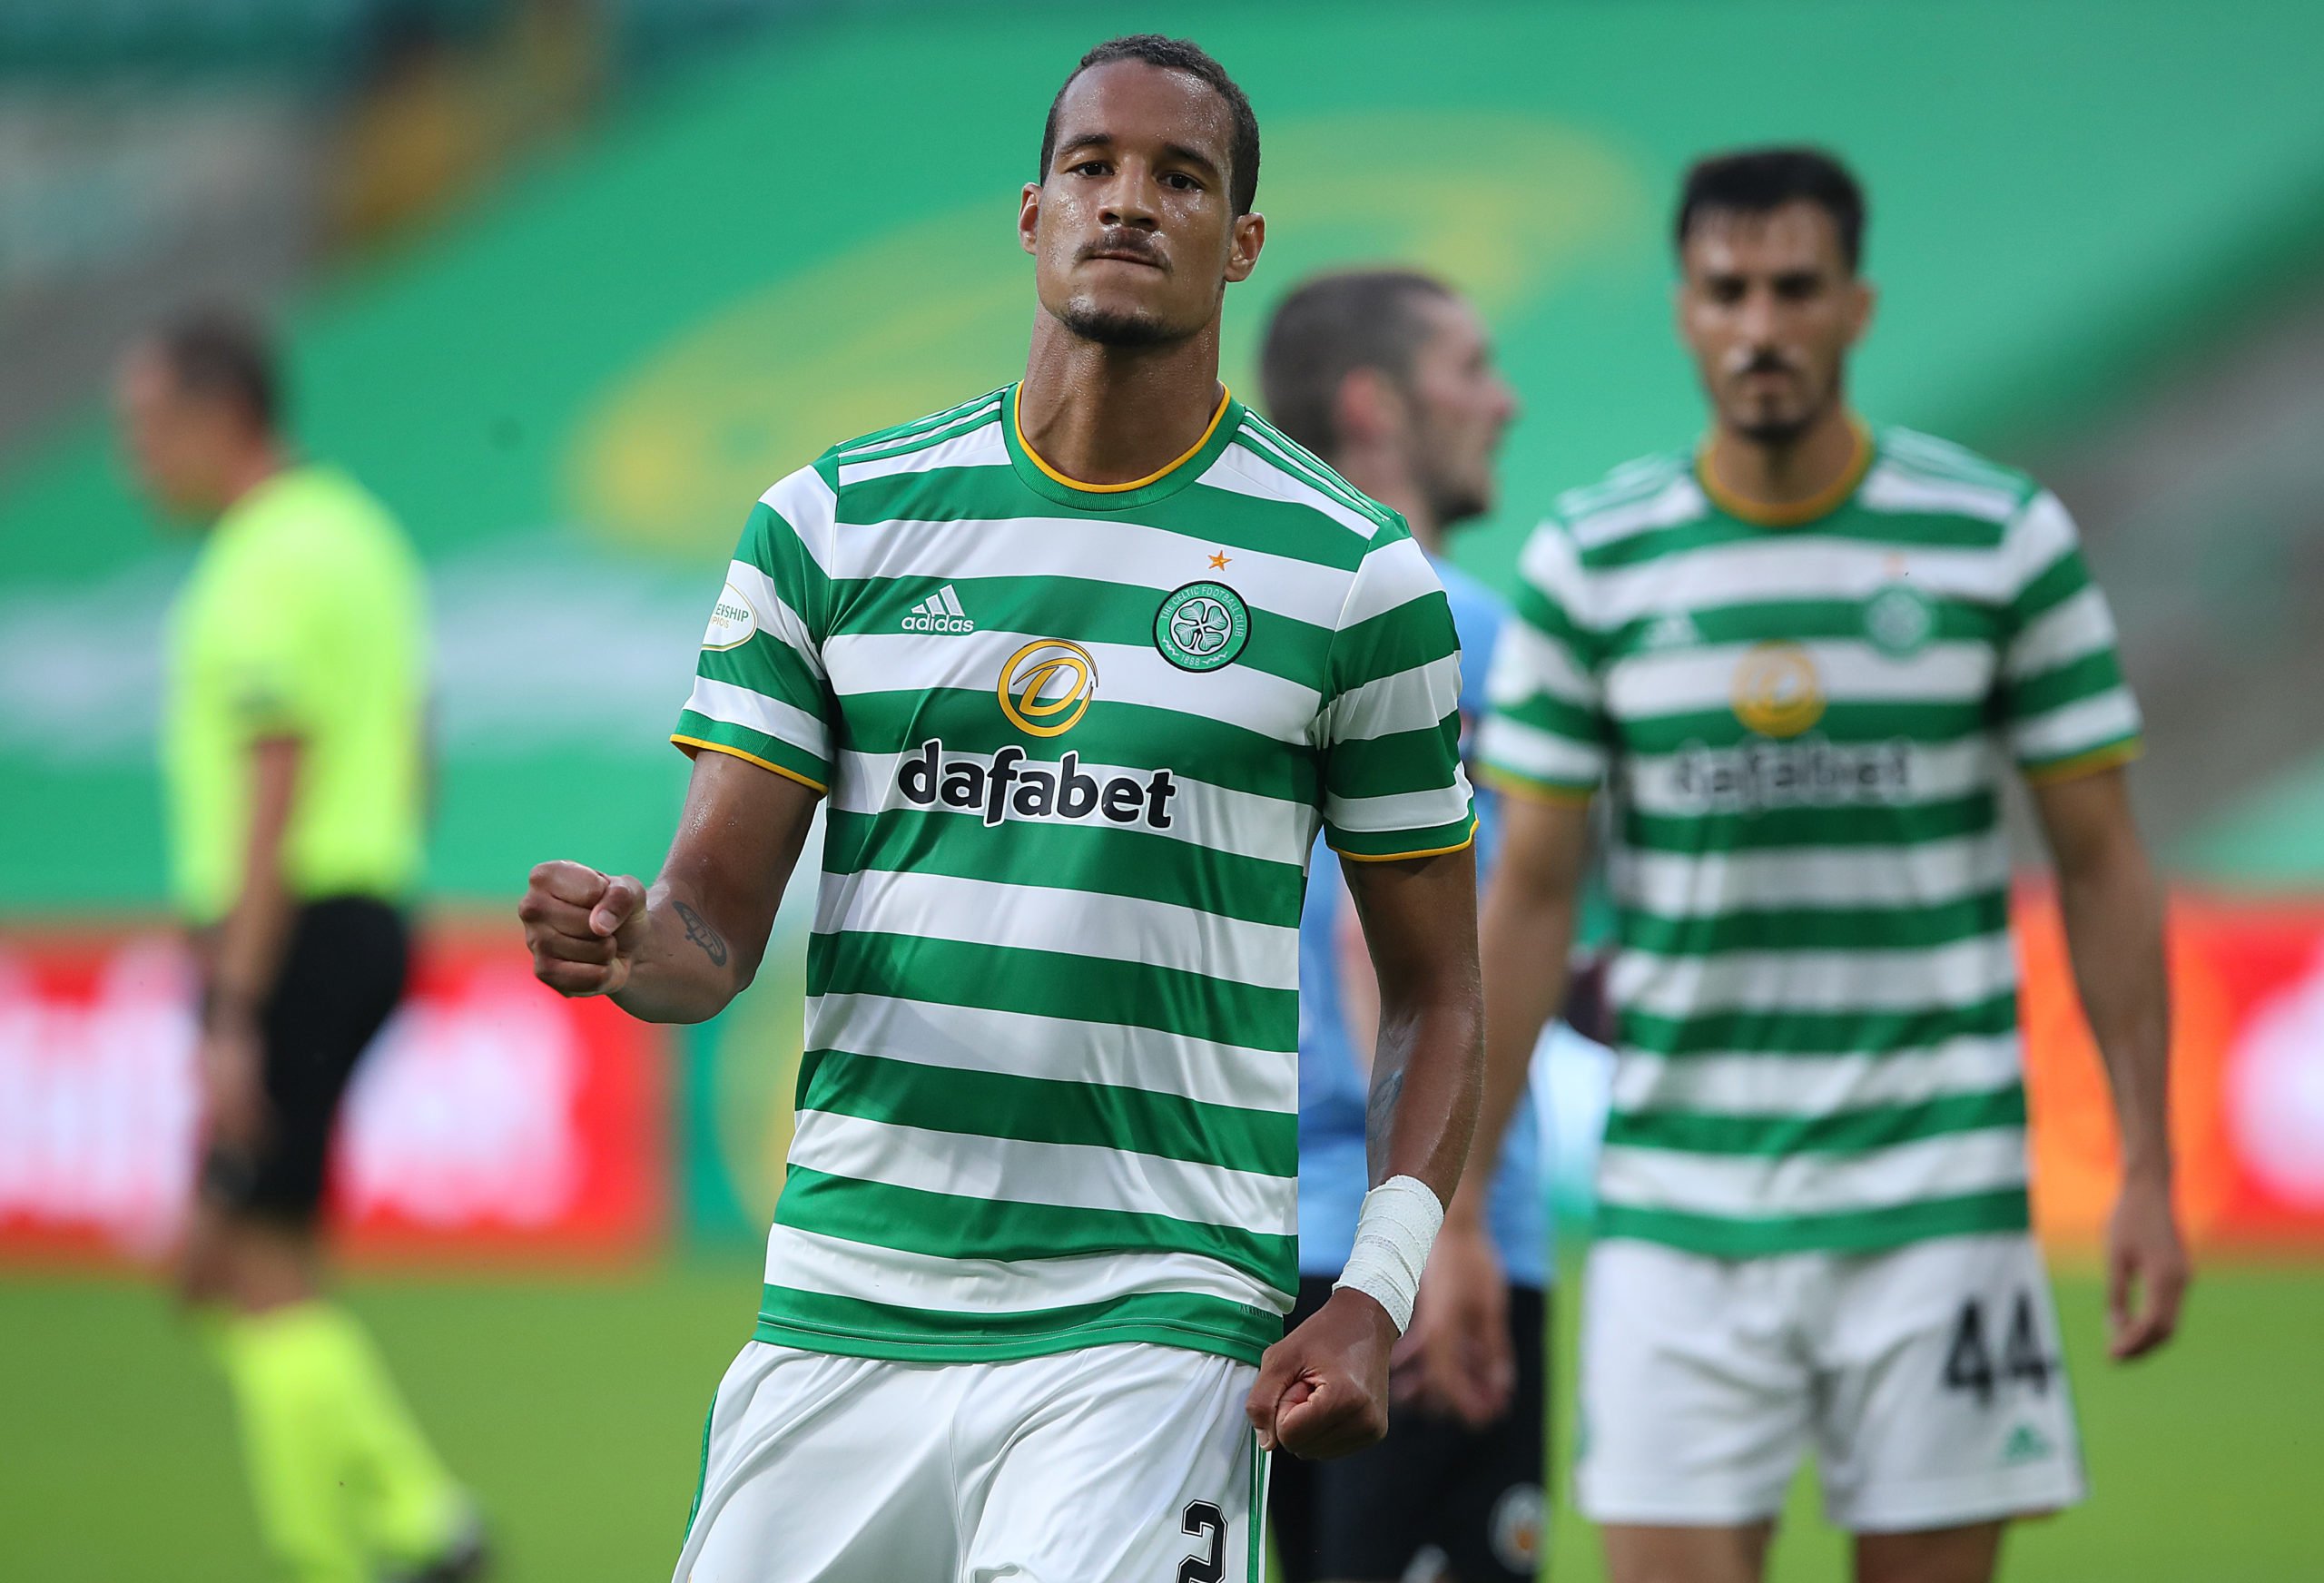 Celtic can consider a return to a back three when the likes of Christopher Jullien return